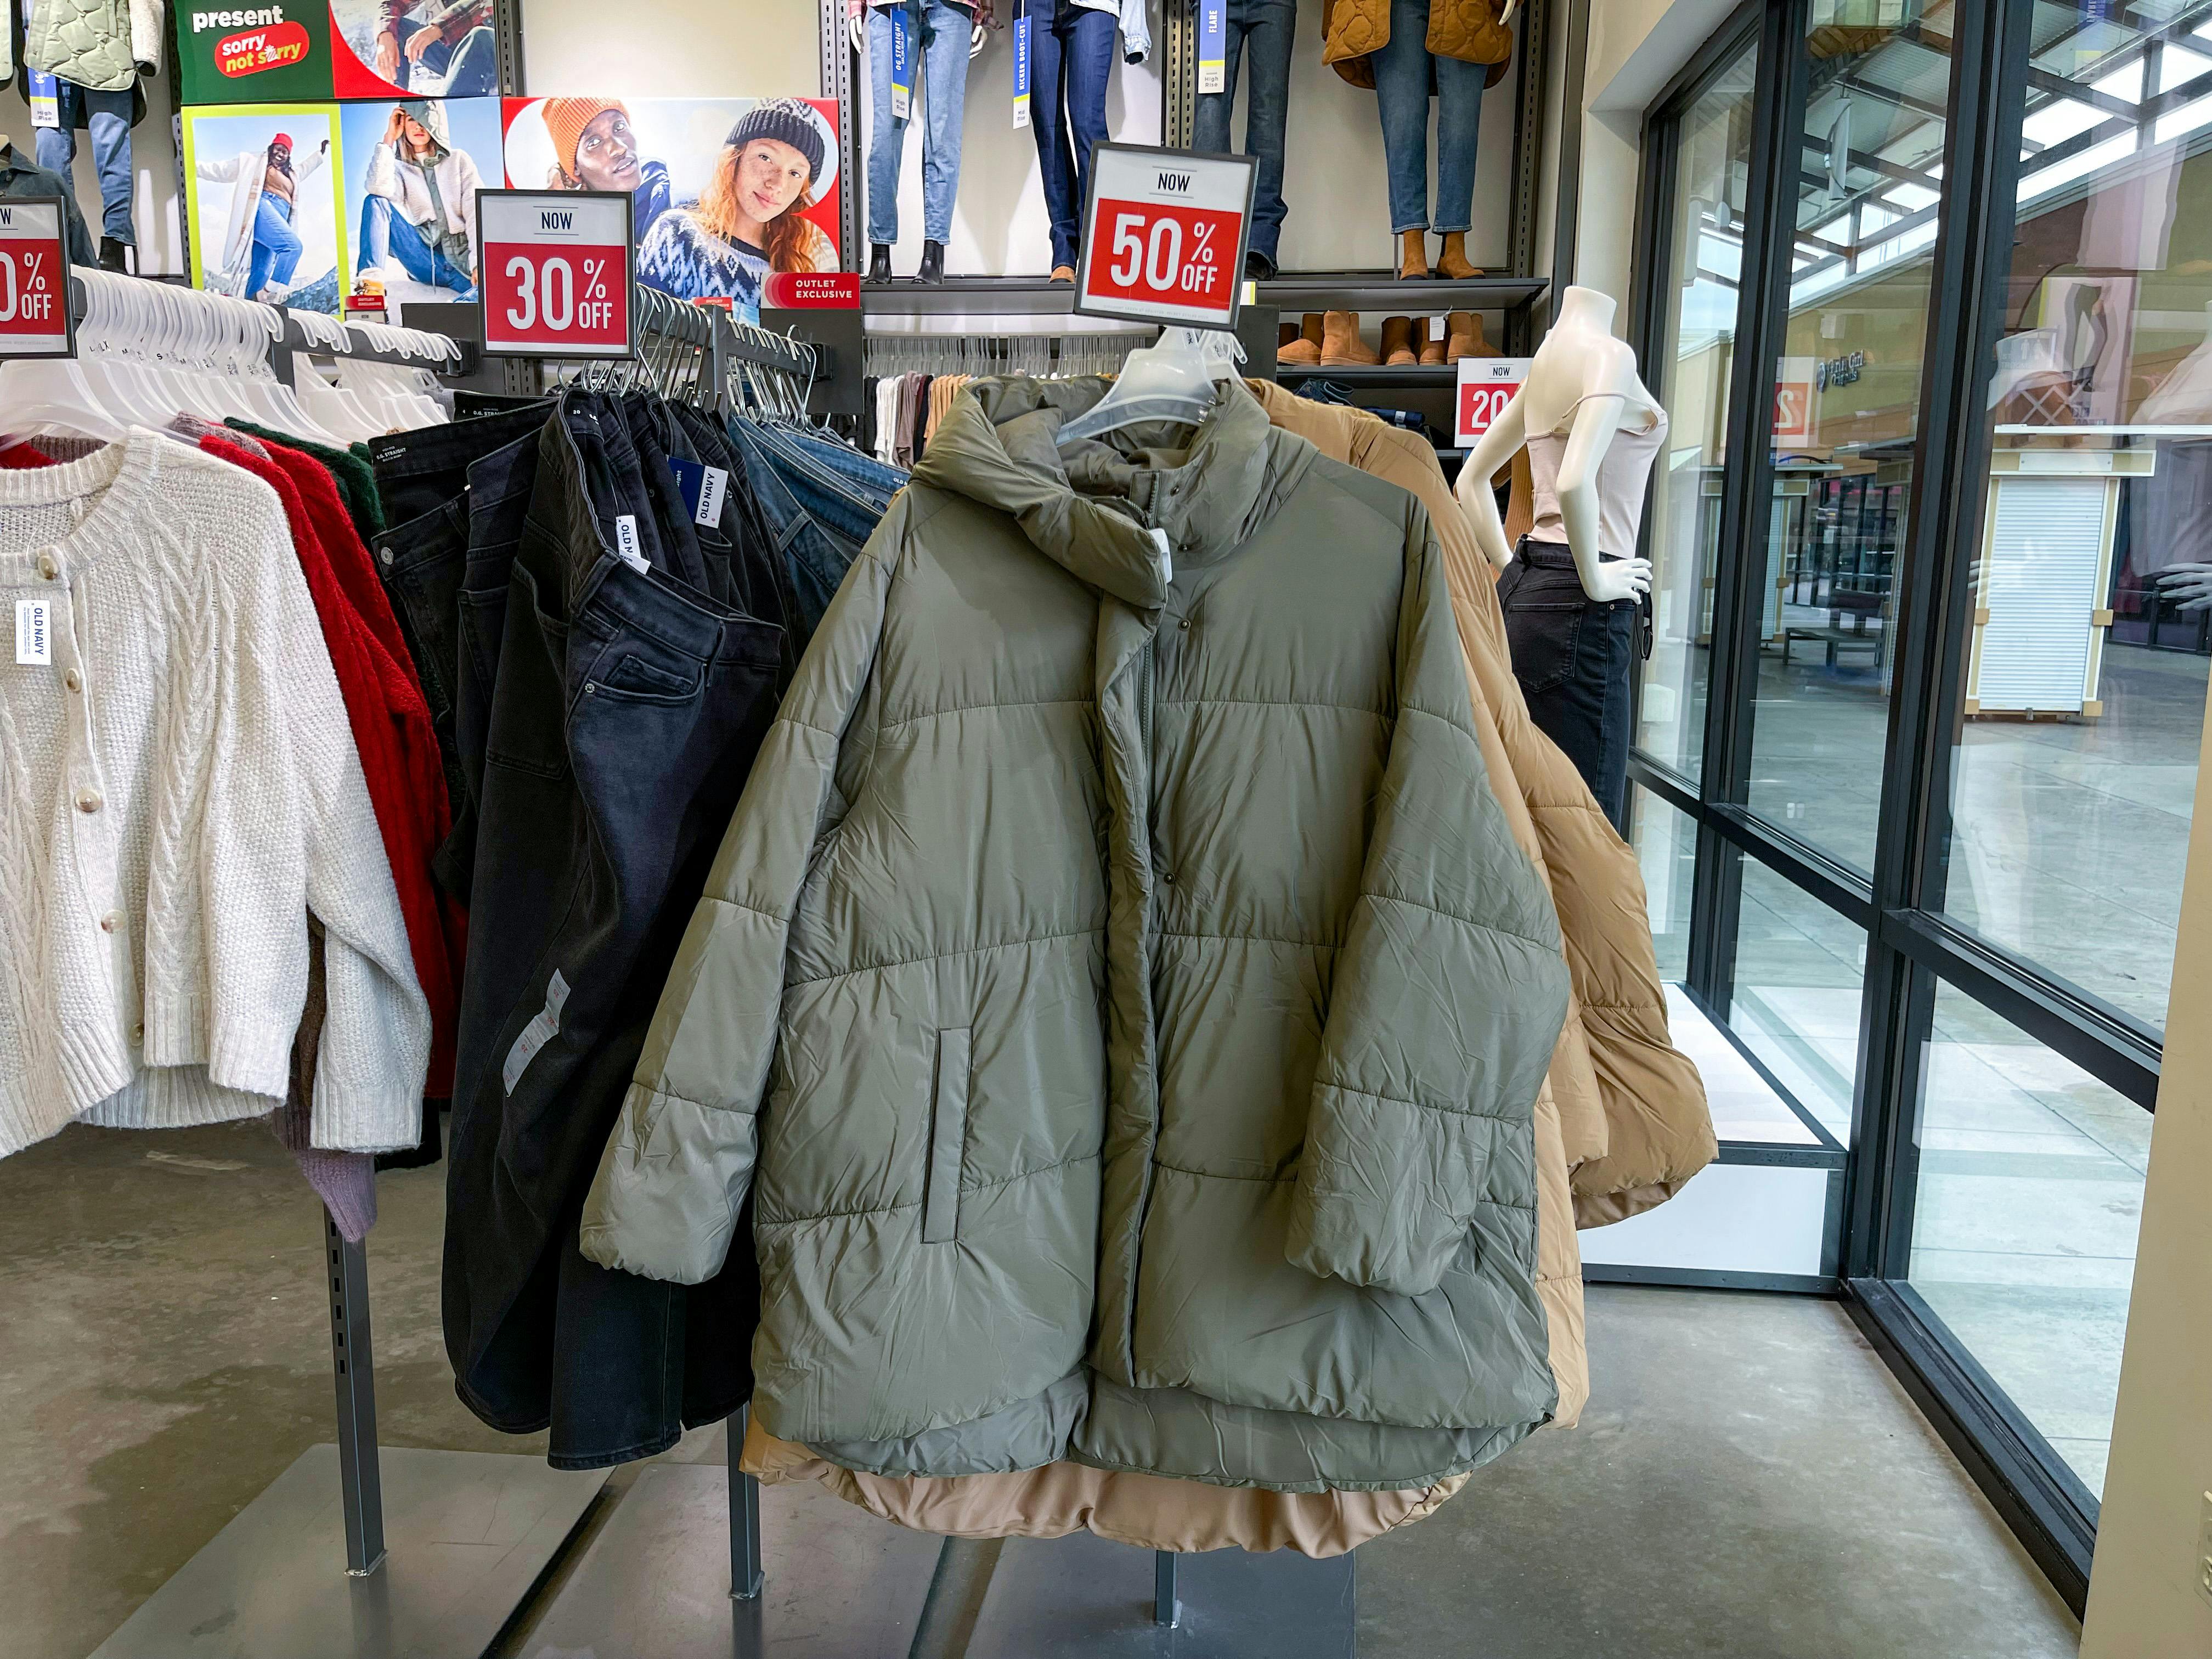 A big puffer jacket hanging on a store rack with a 50% off sign